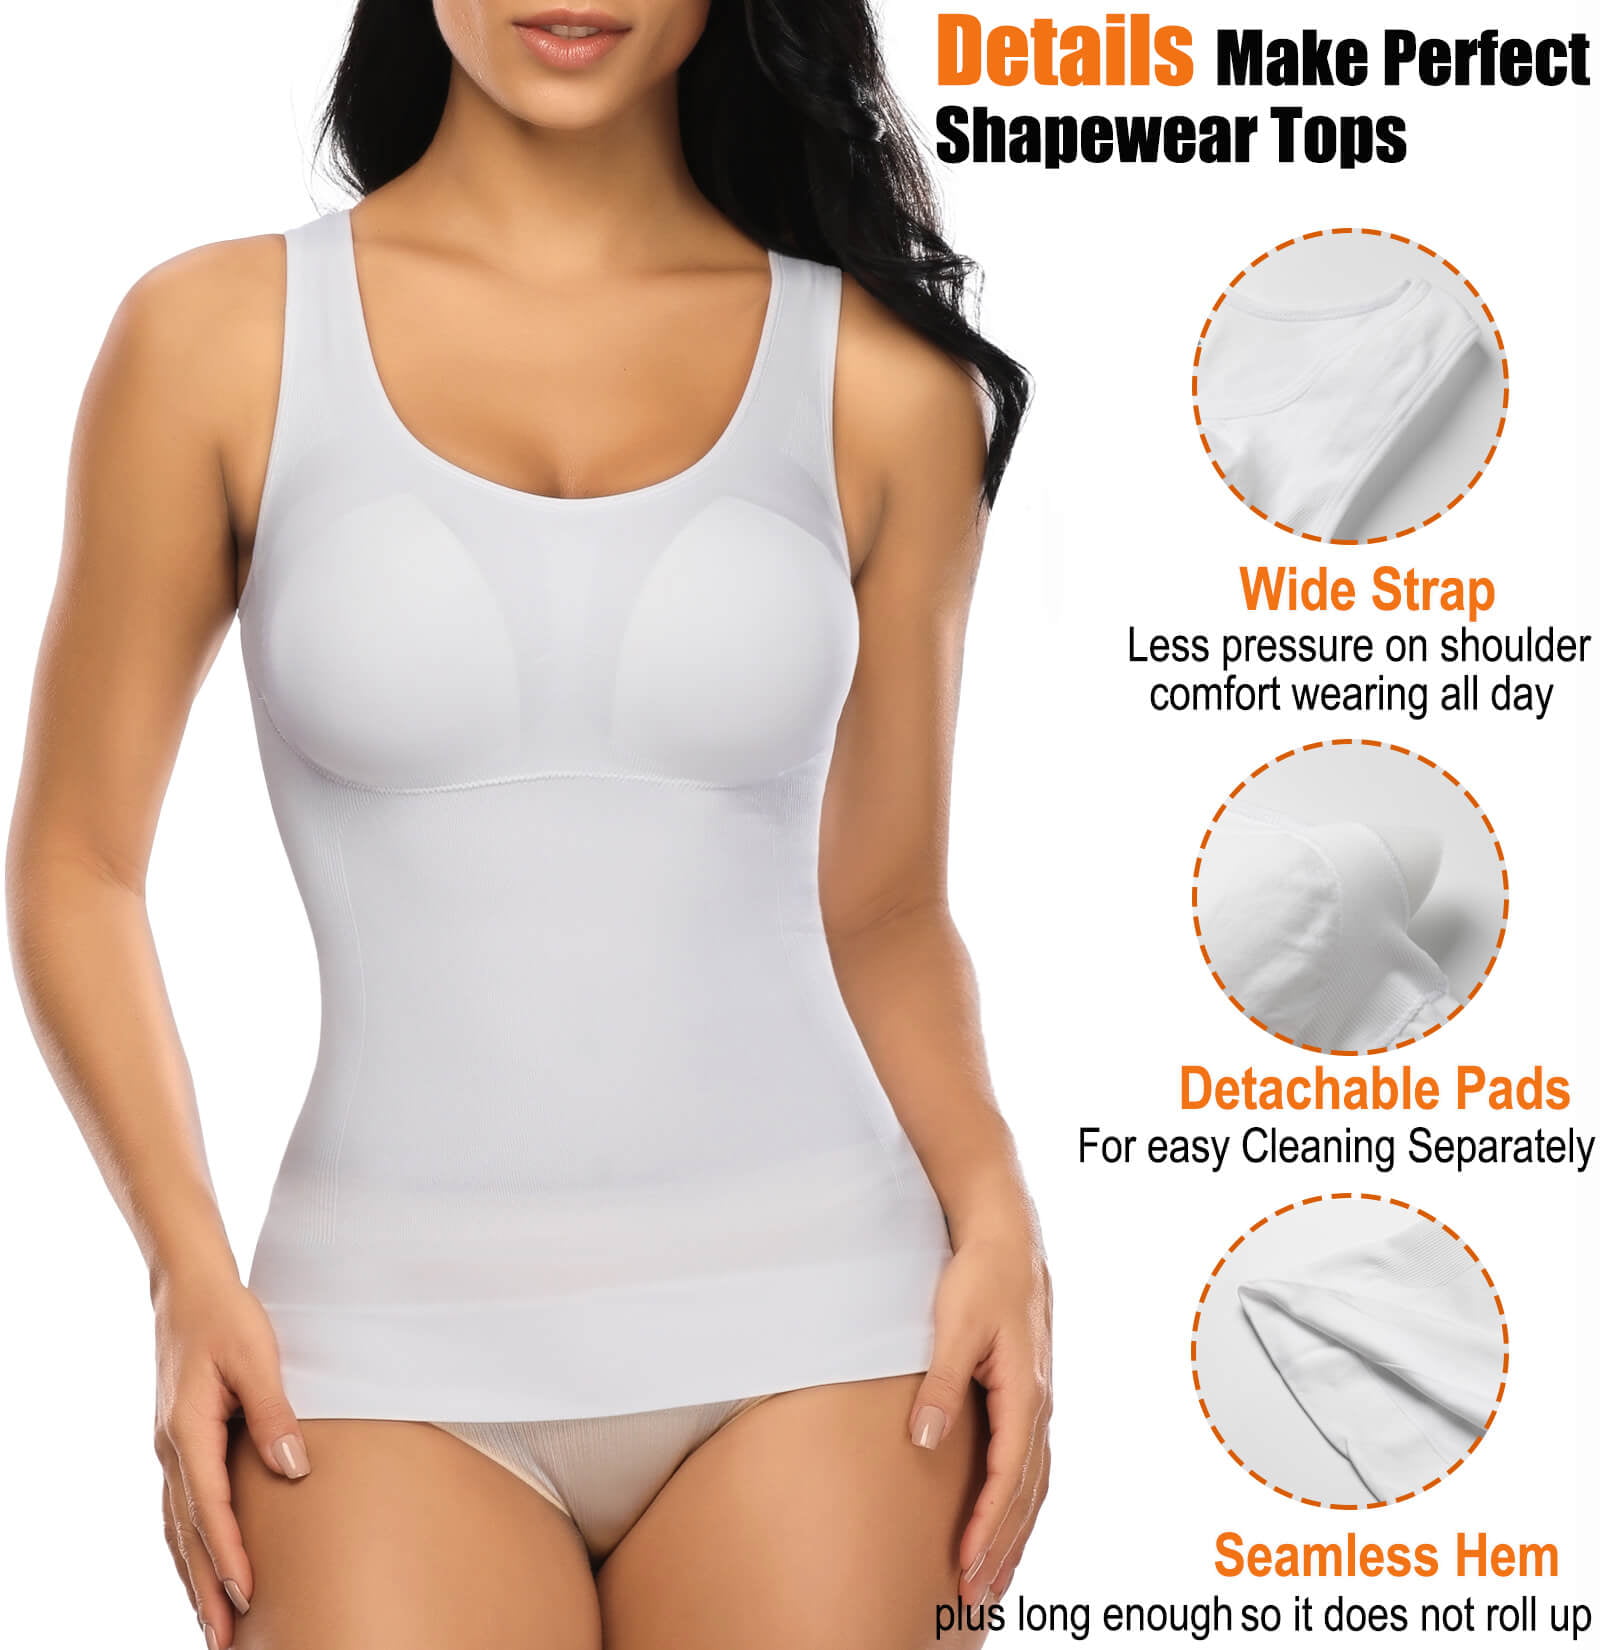 Women's Cami Shaper with Built in Bra Tummy Control Camisole